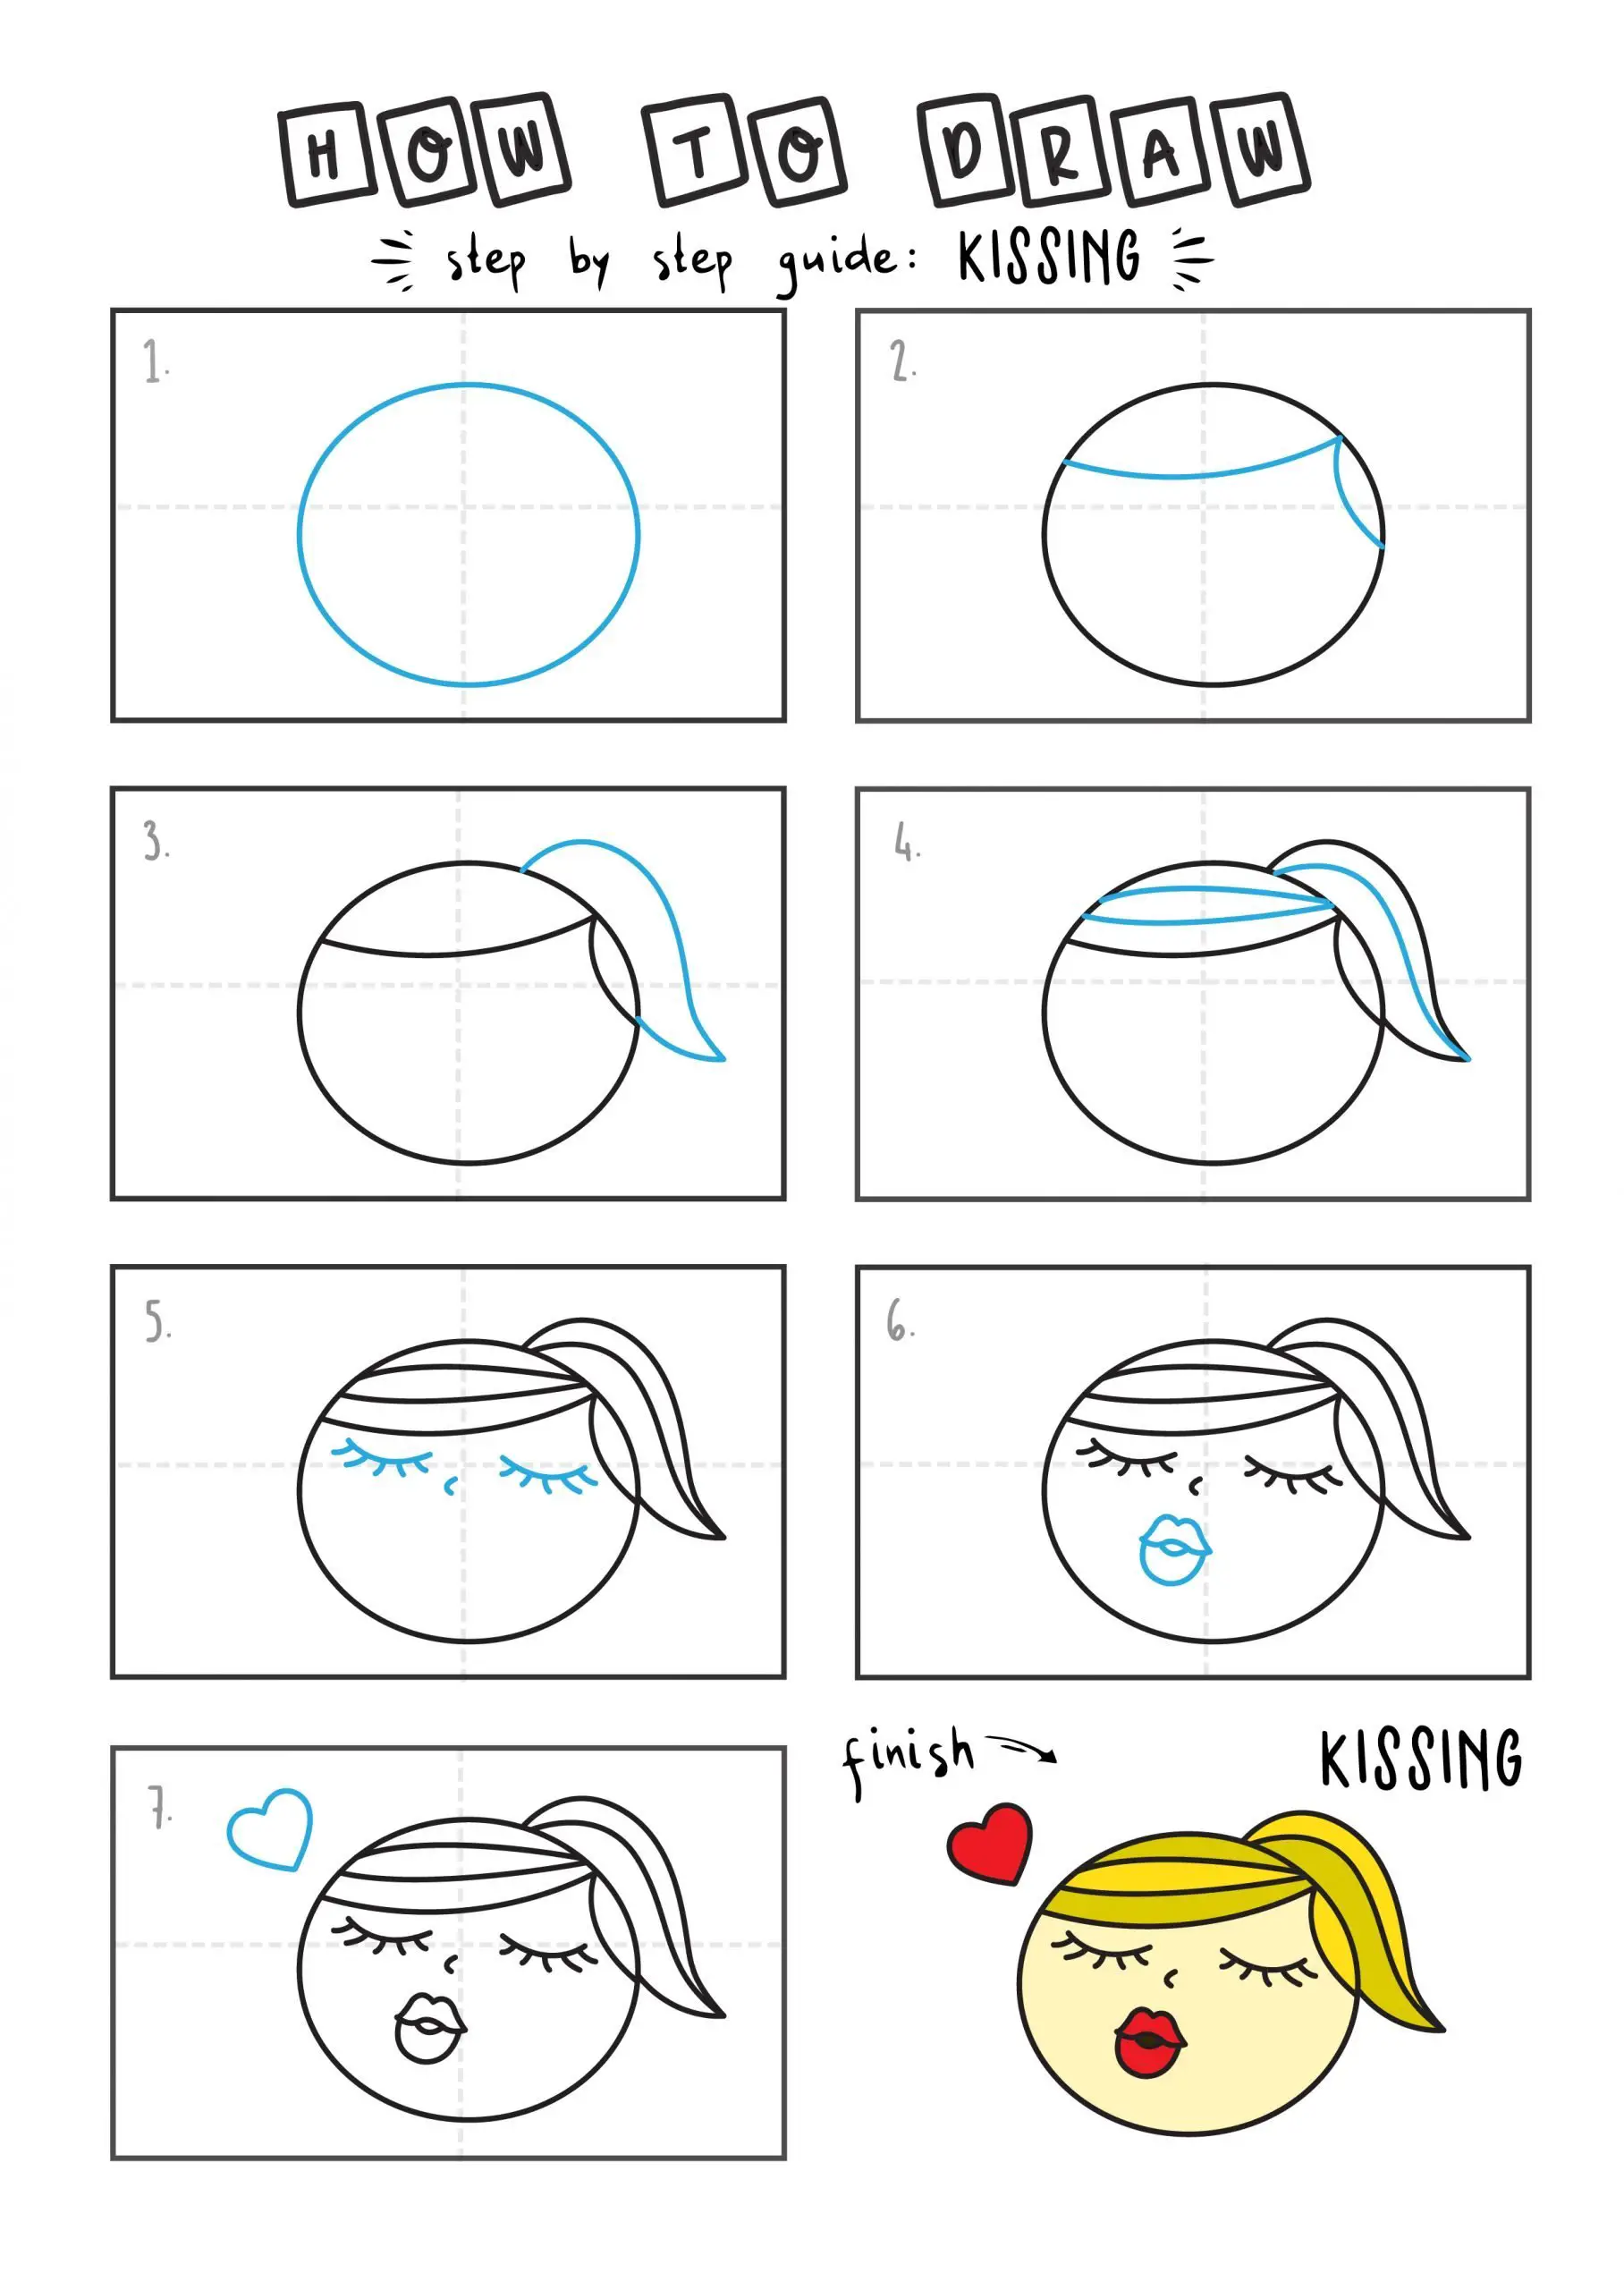 How to draw a kissing face arts tutorial step by step for kids